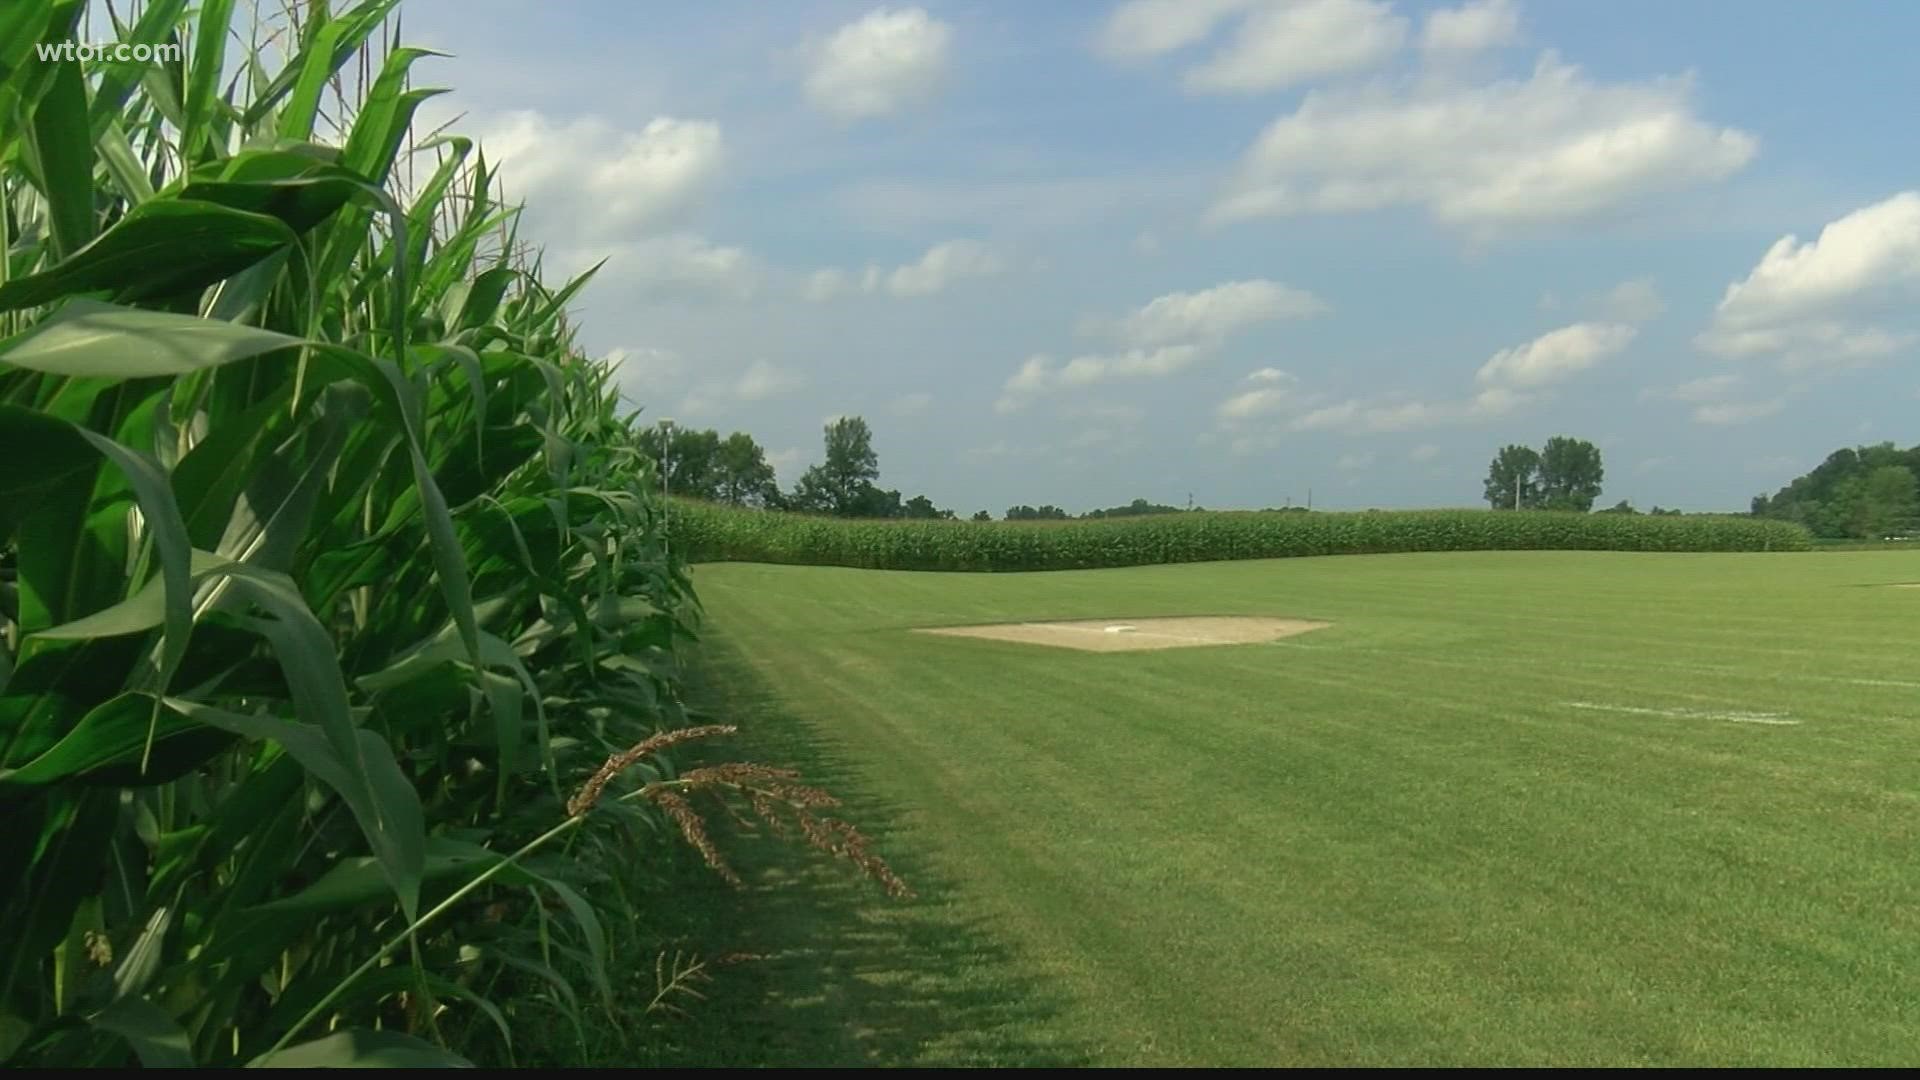 Watch the Opening to the First Game at the Field of Dreams